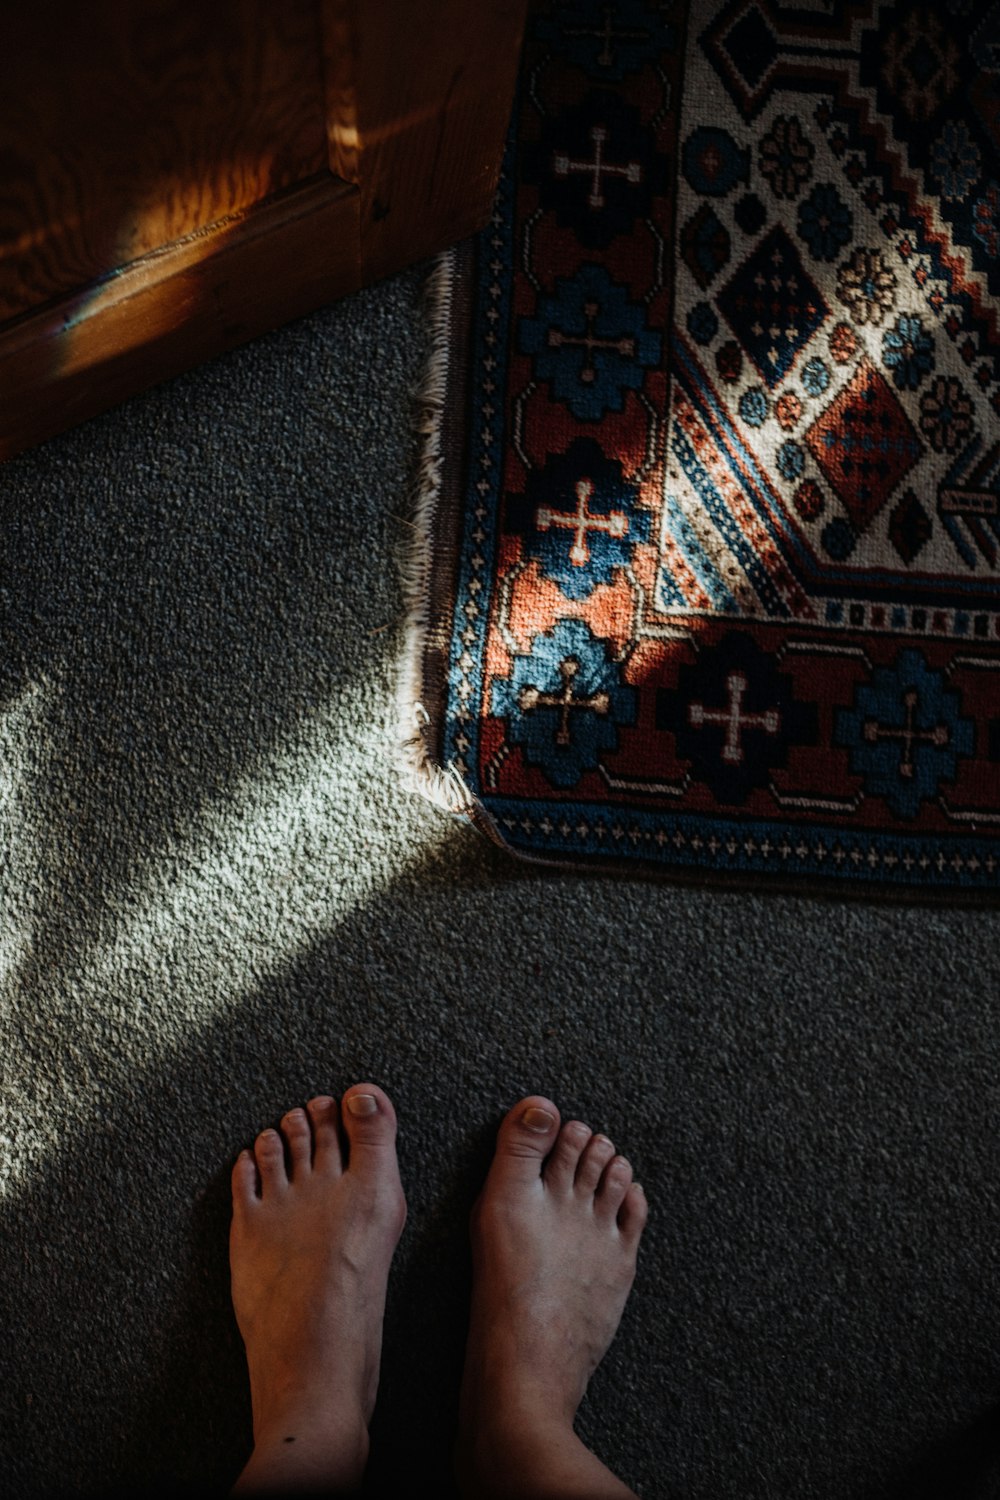 a person standing in front of a rug on the floor